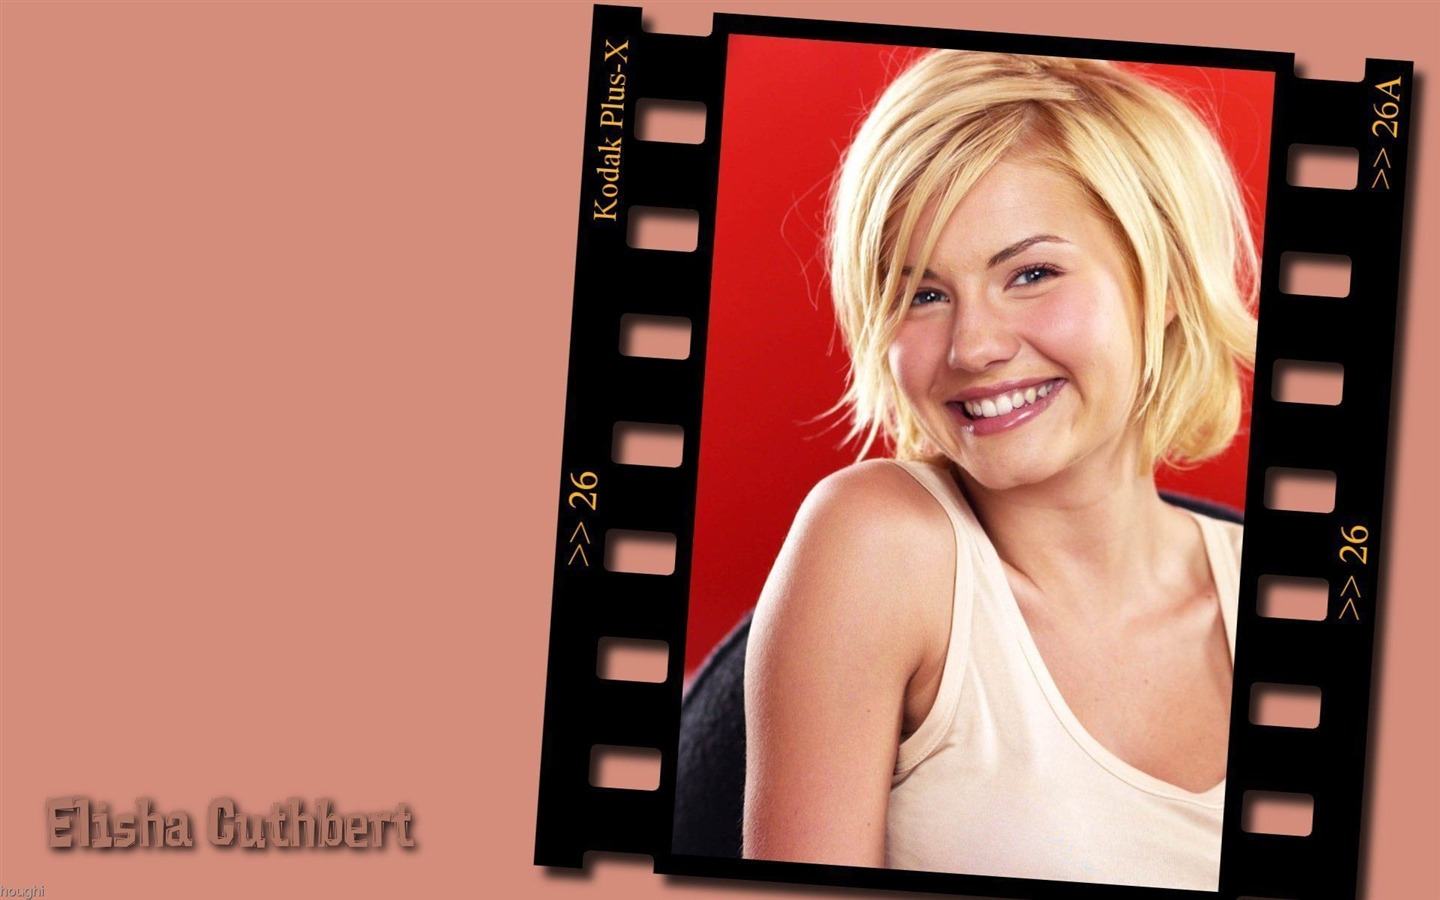 Elisha Cuthbert #014 - 1440x900 Wallpapers Pictures Photos Images